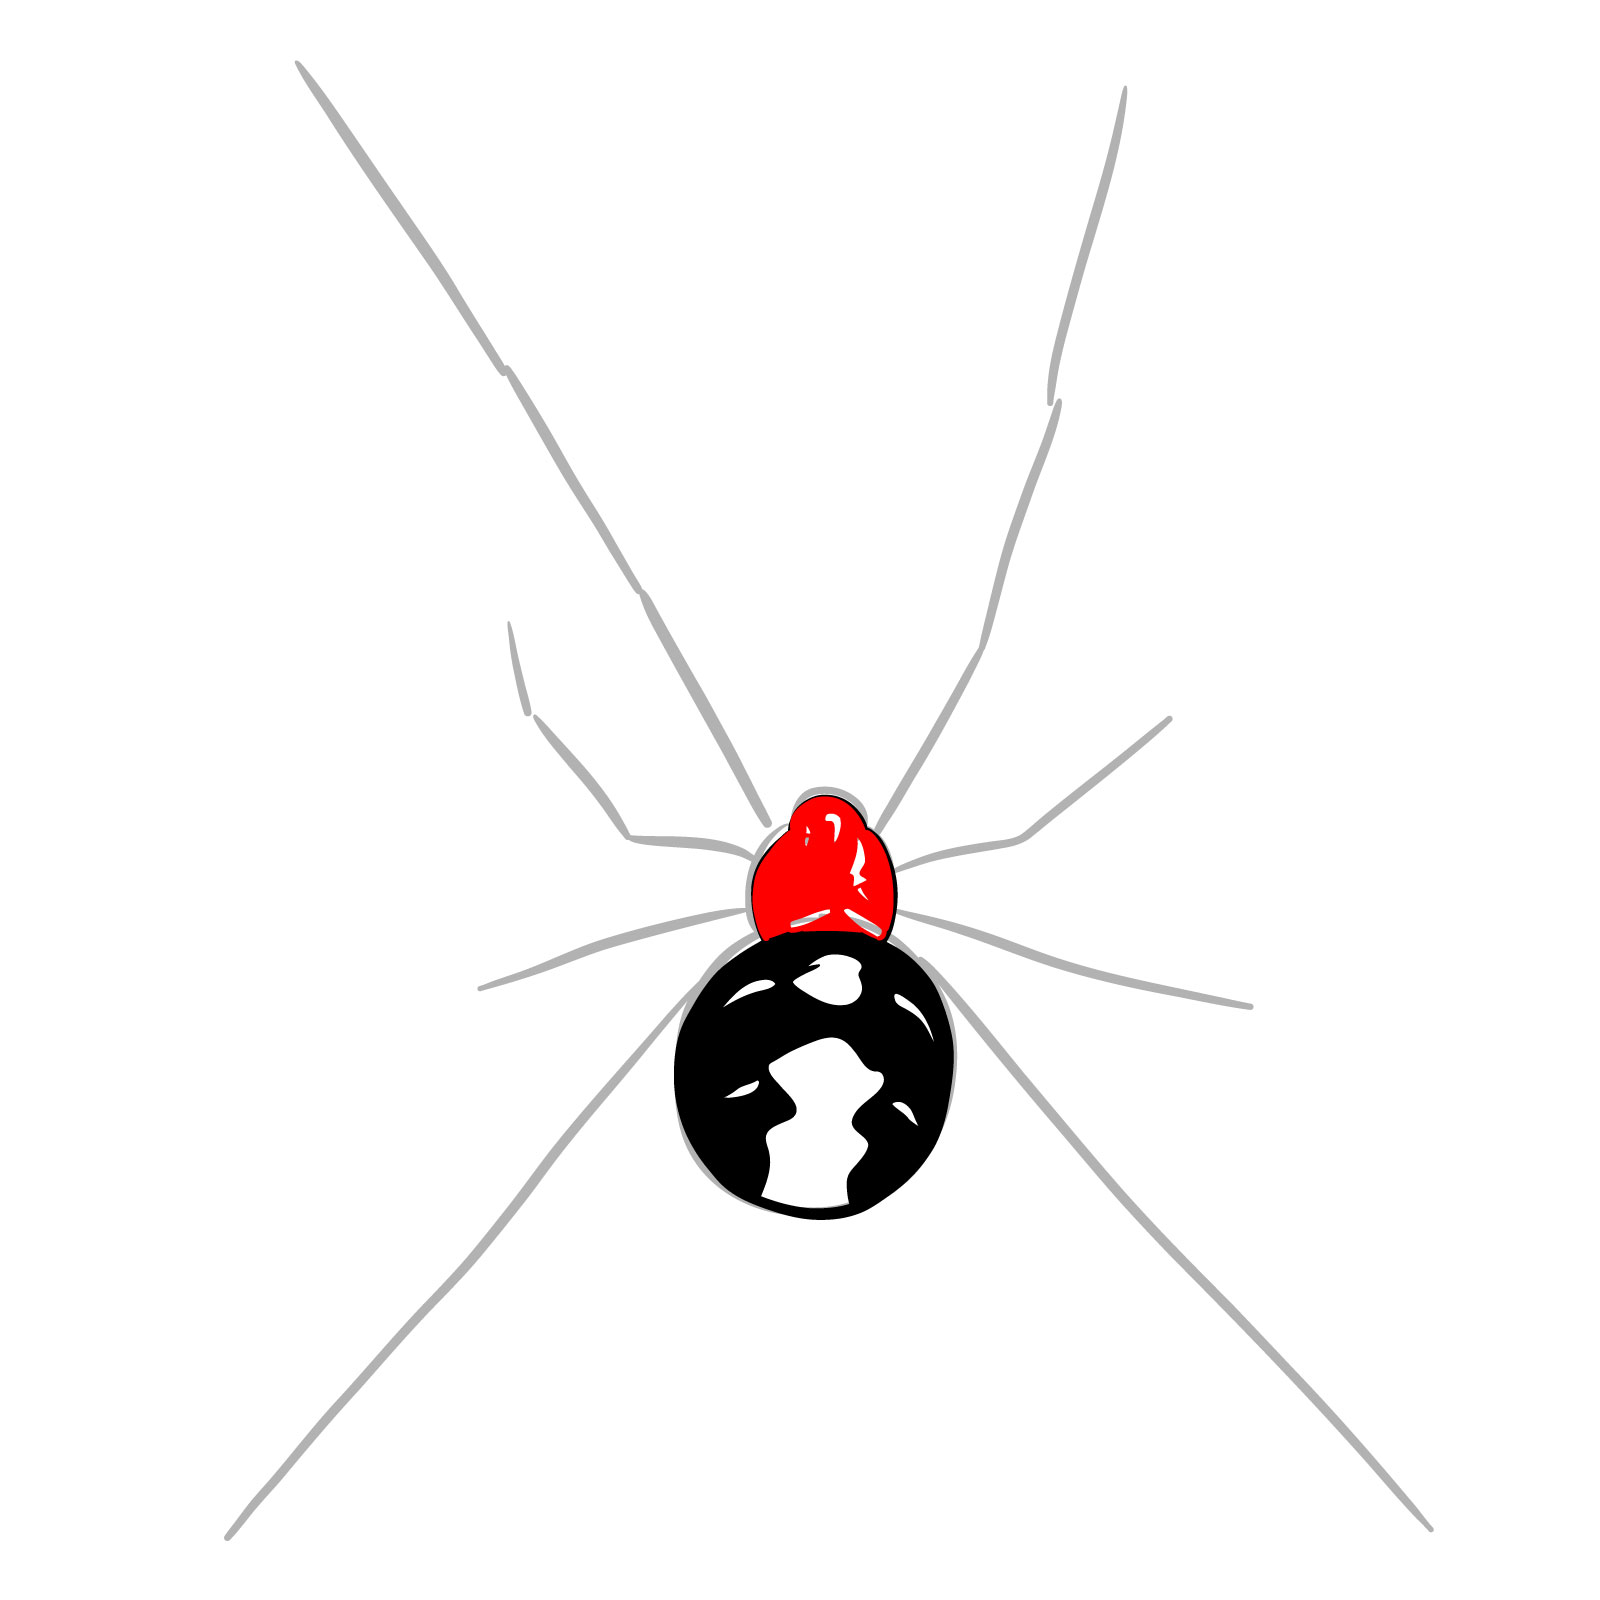 How to draw a Black Widow Spider - step 08